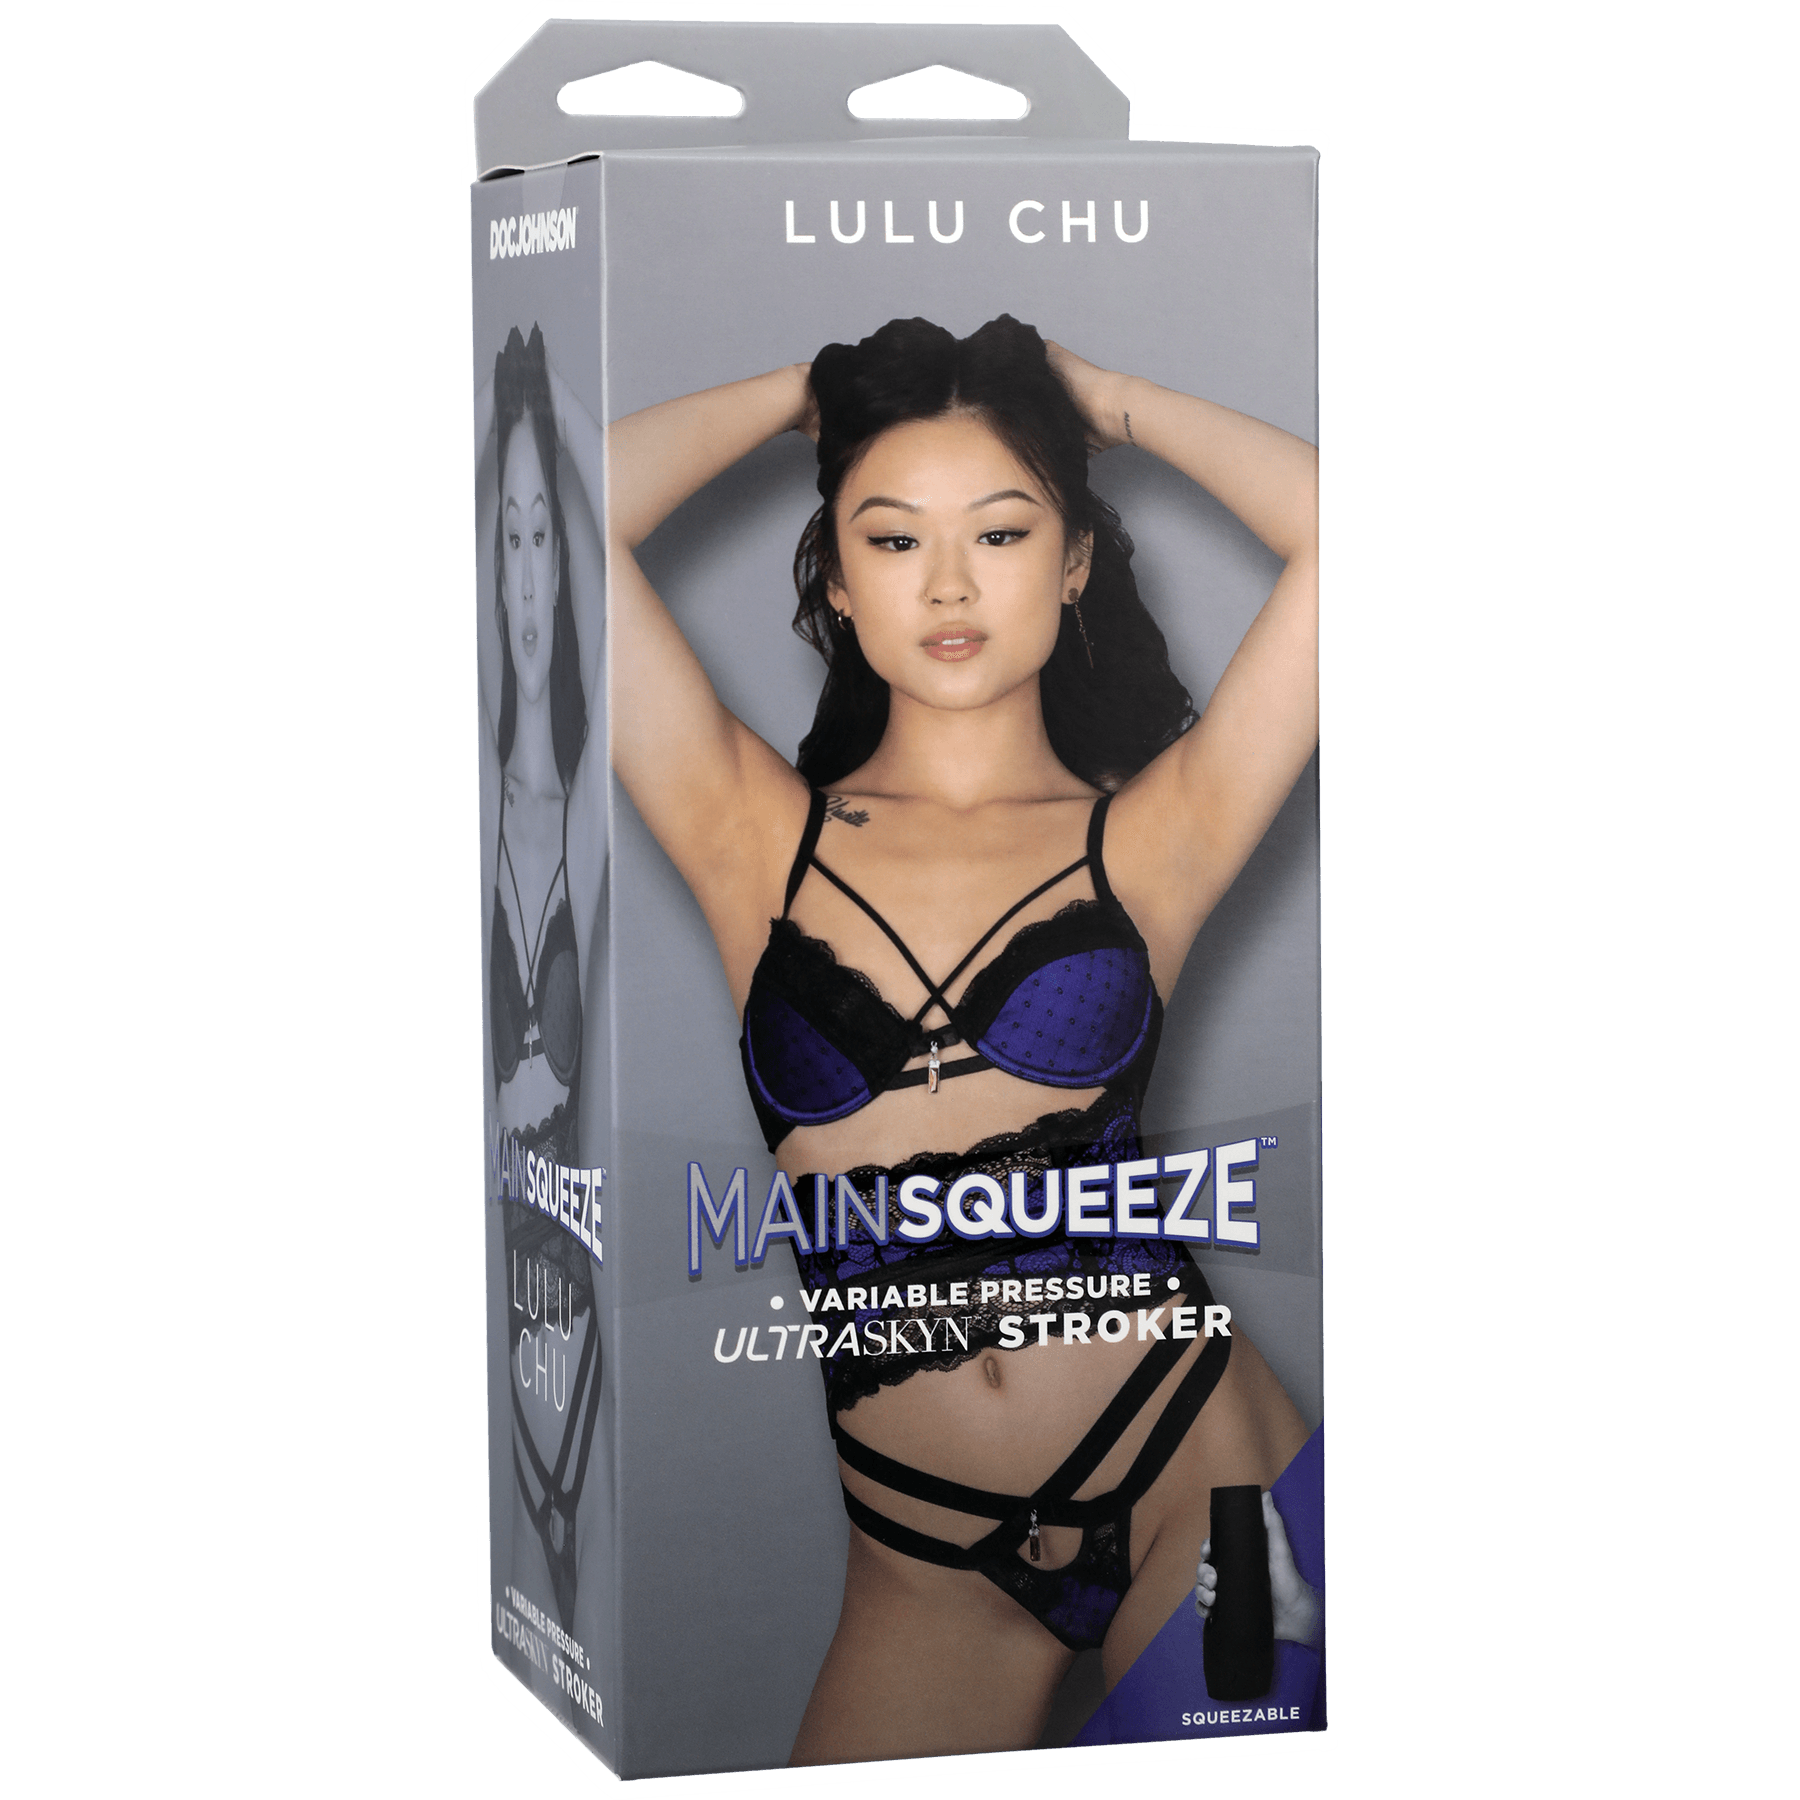 Doc Johnson Main Squeeze Lulu Chu - Buy At Luxury Toy X - Free 3-Day Shipping